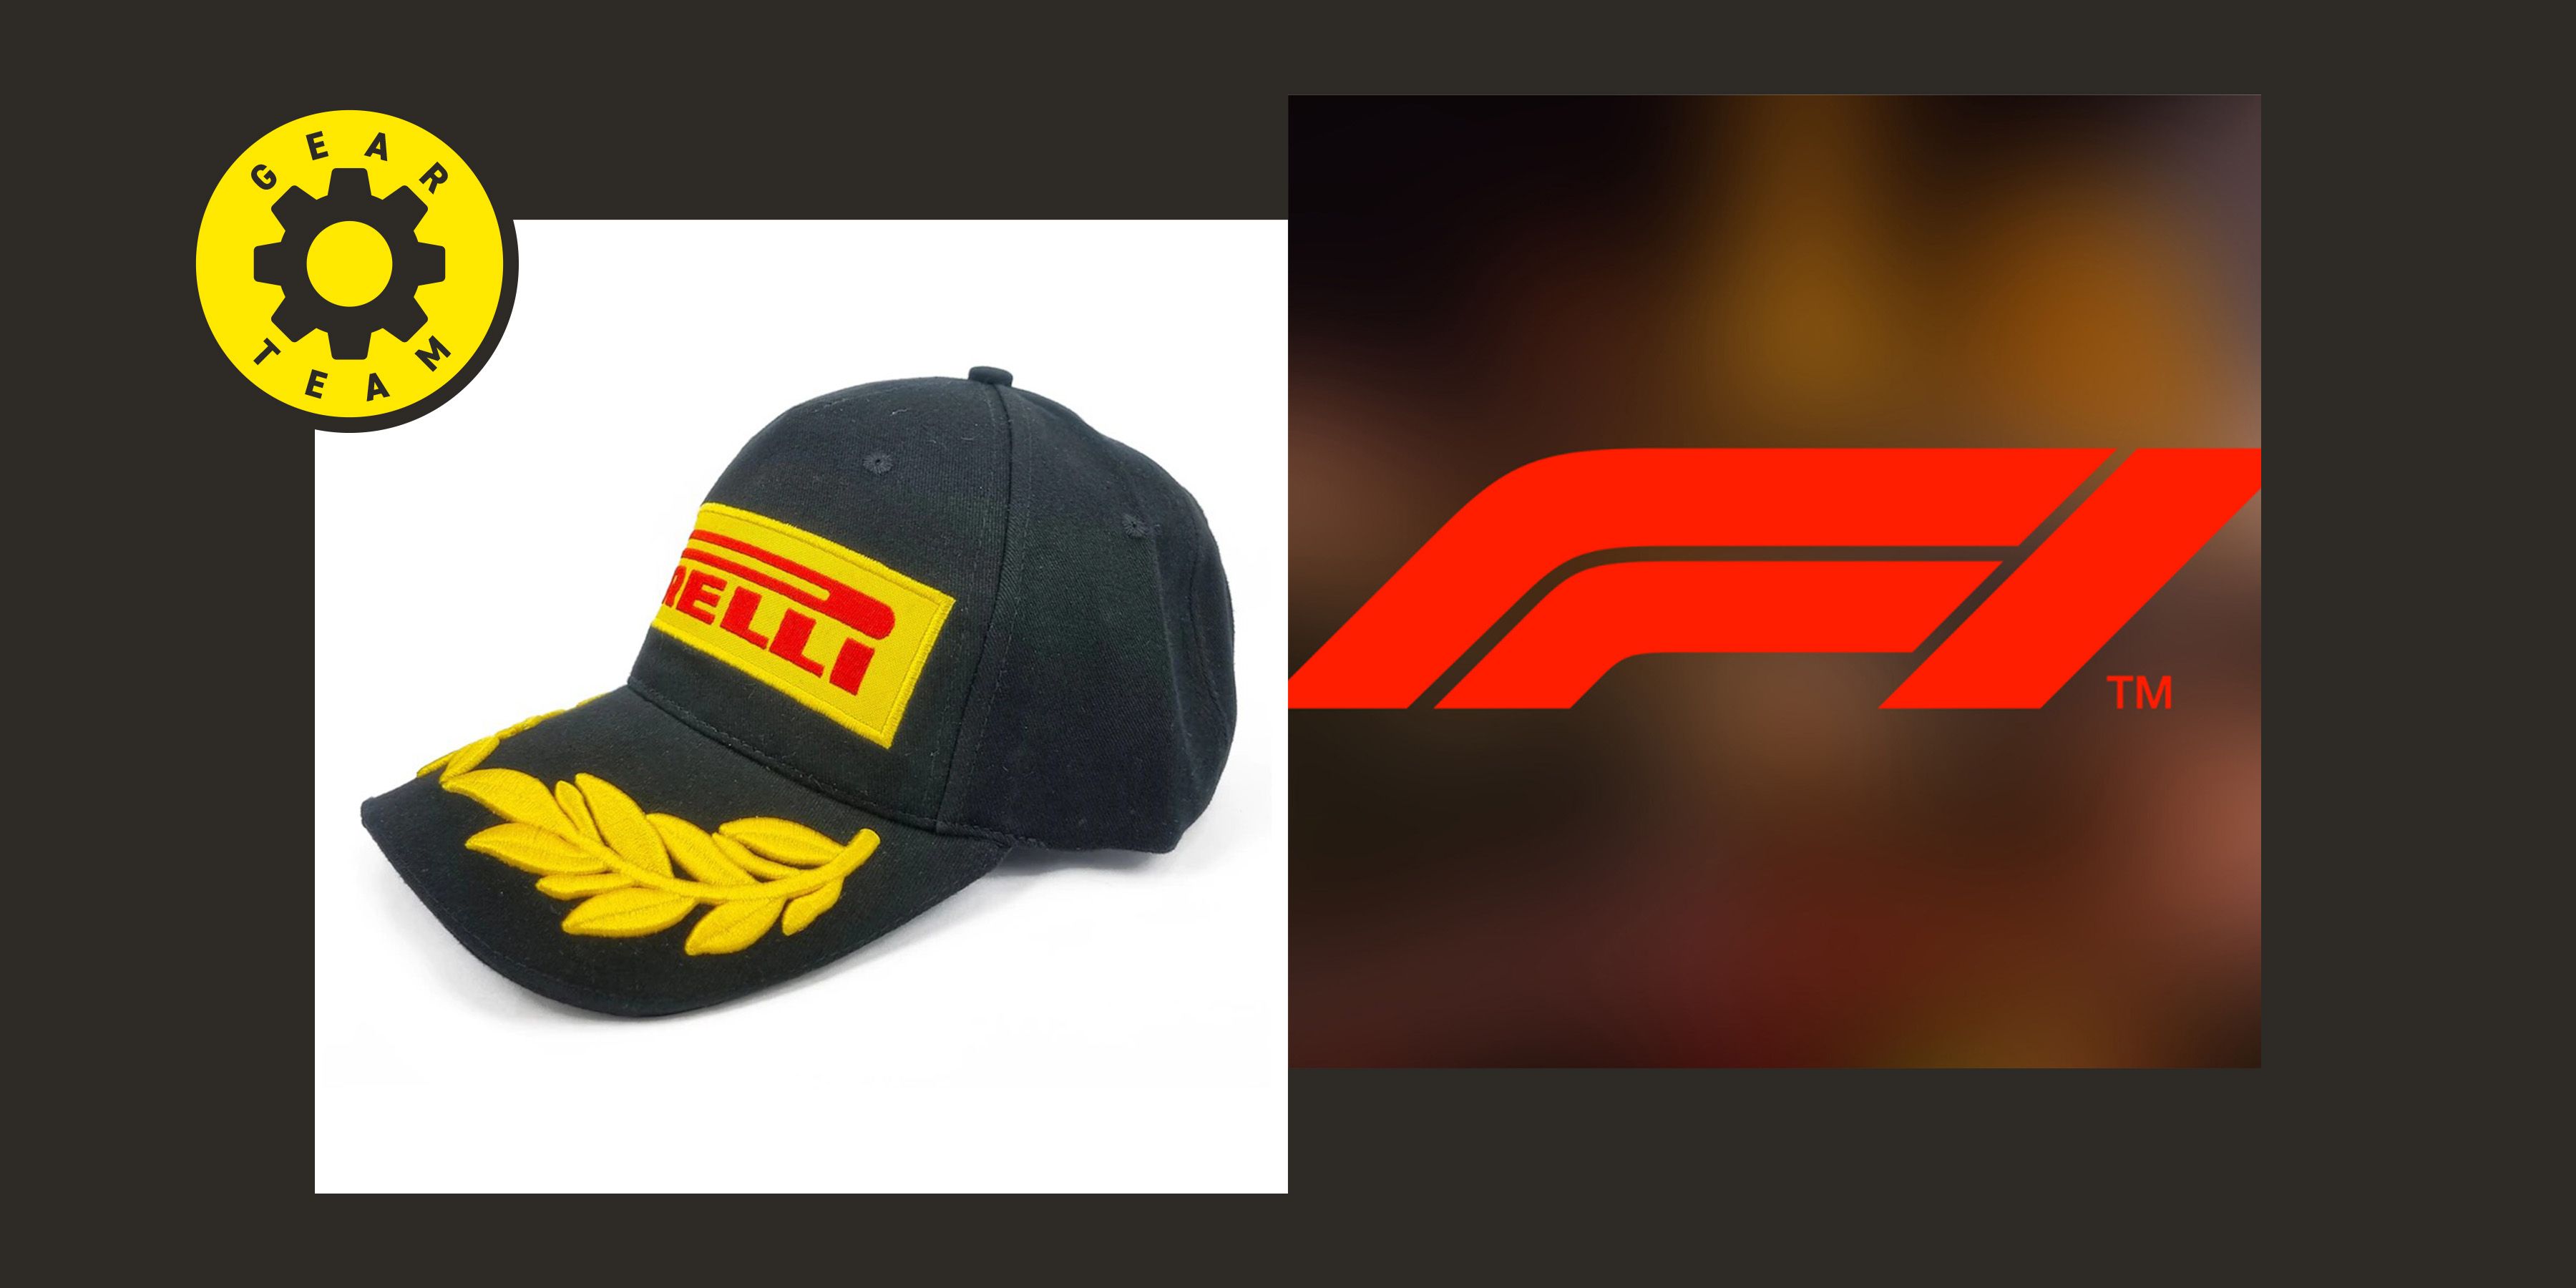 Formula 1 Is Back. Start Your Engines with Official F1 Gear